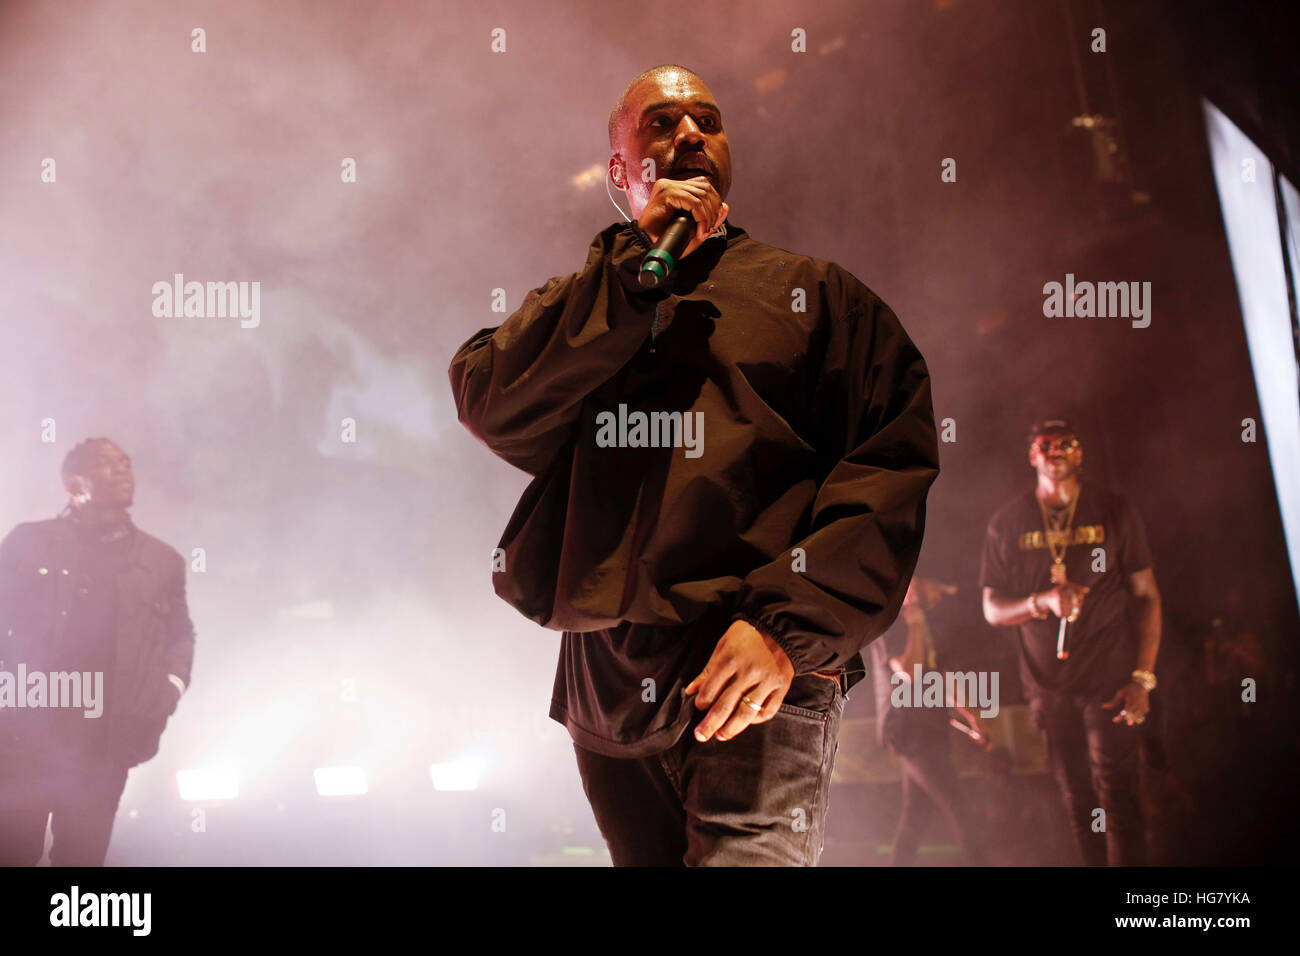 (L-R) Pusha T, Kanye West and 2 Chainz of G.O.O.D Music perform at Hot 97 Summer Jam 2016 at Metlife Stadium in East Rutherford, New Jersey. Stock Photo